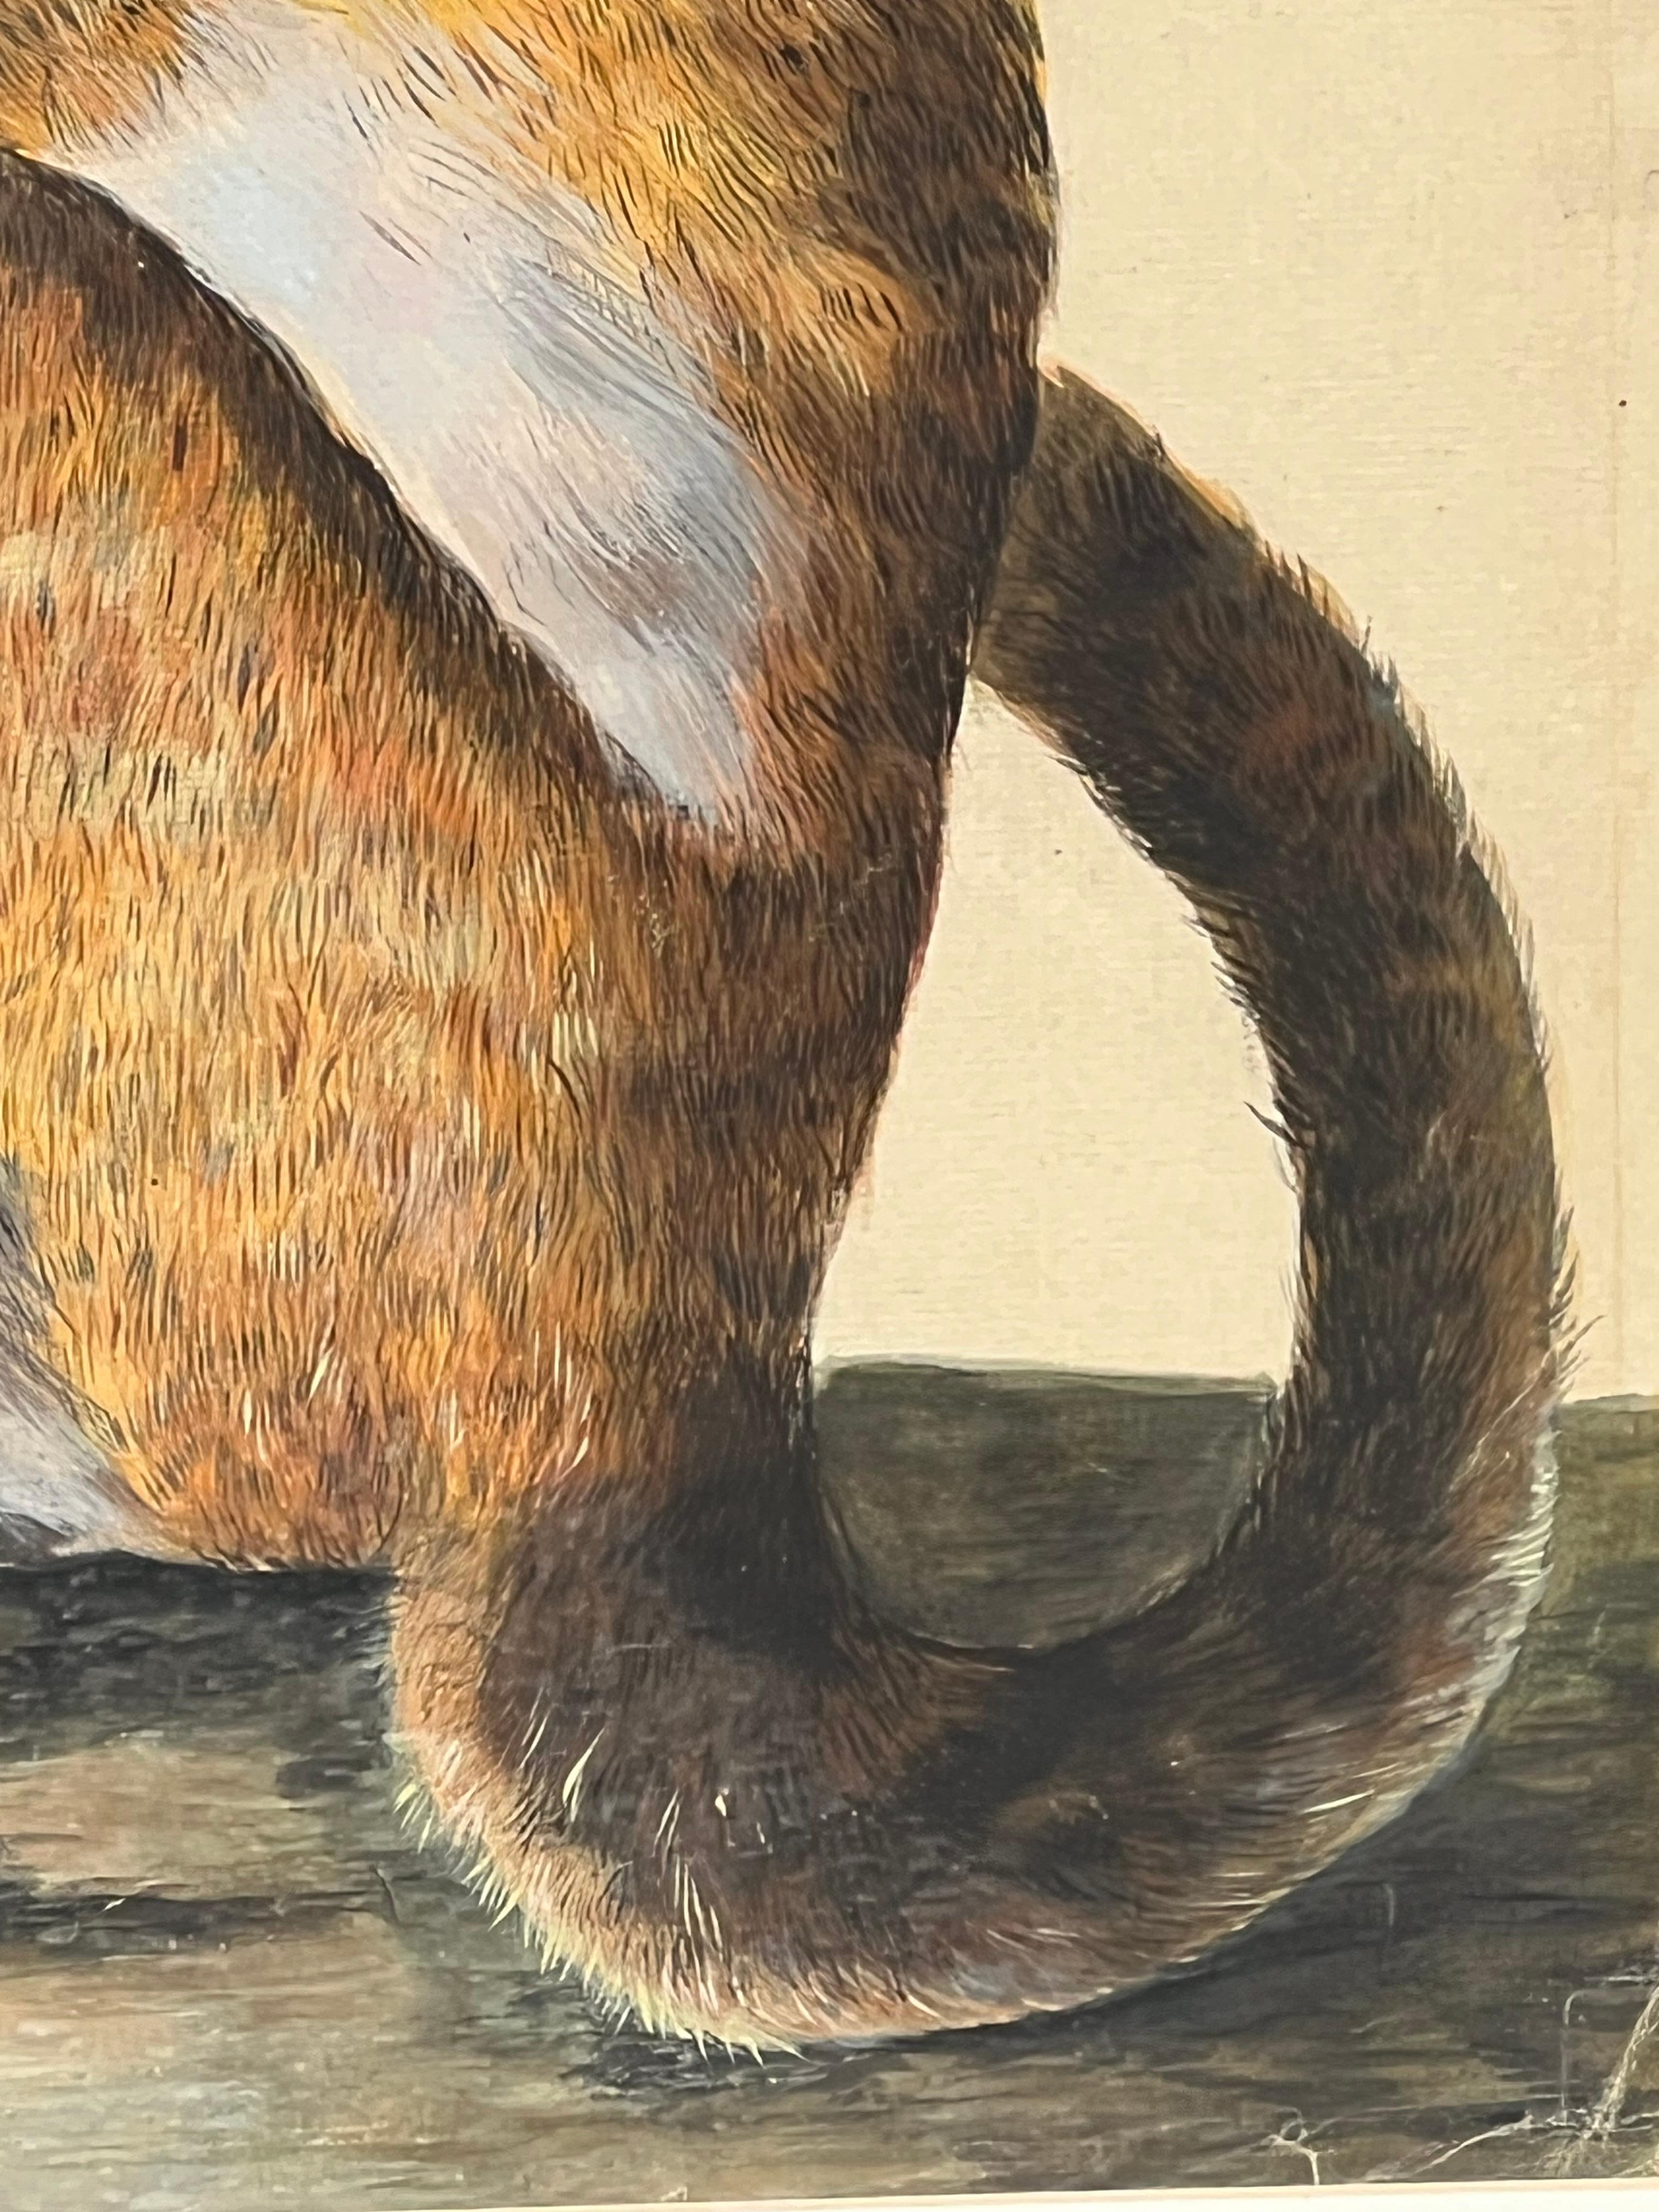 Early naturalistic wildlife rendering by the English artist Peter Paillou. The work features a delicately rendered depiction of a possible capuchin monkey from an 18th century specimen. Currently hung in a wooden, bamboo style frame with a cream